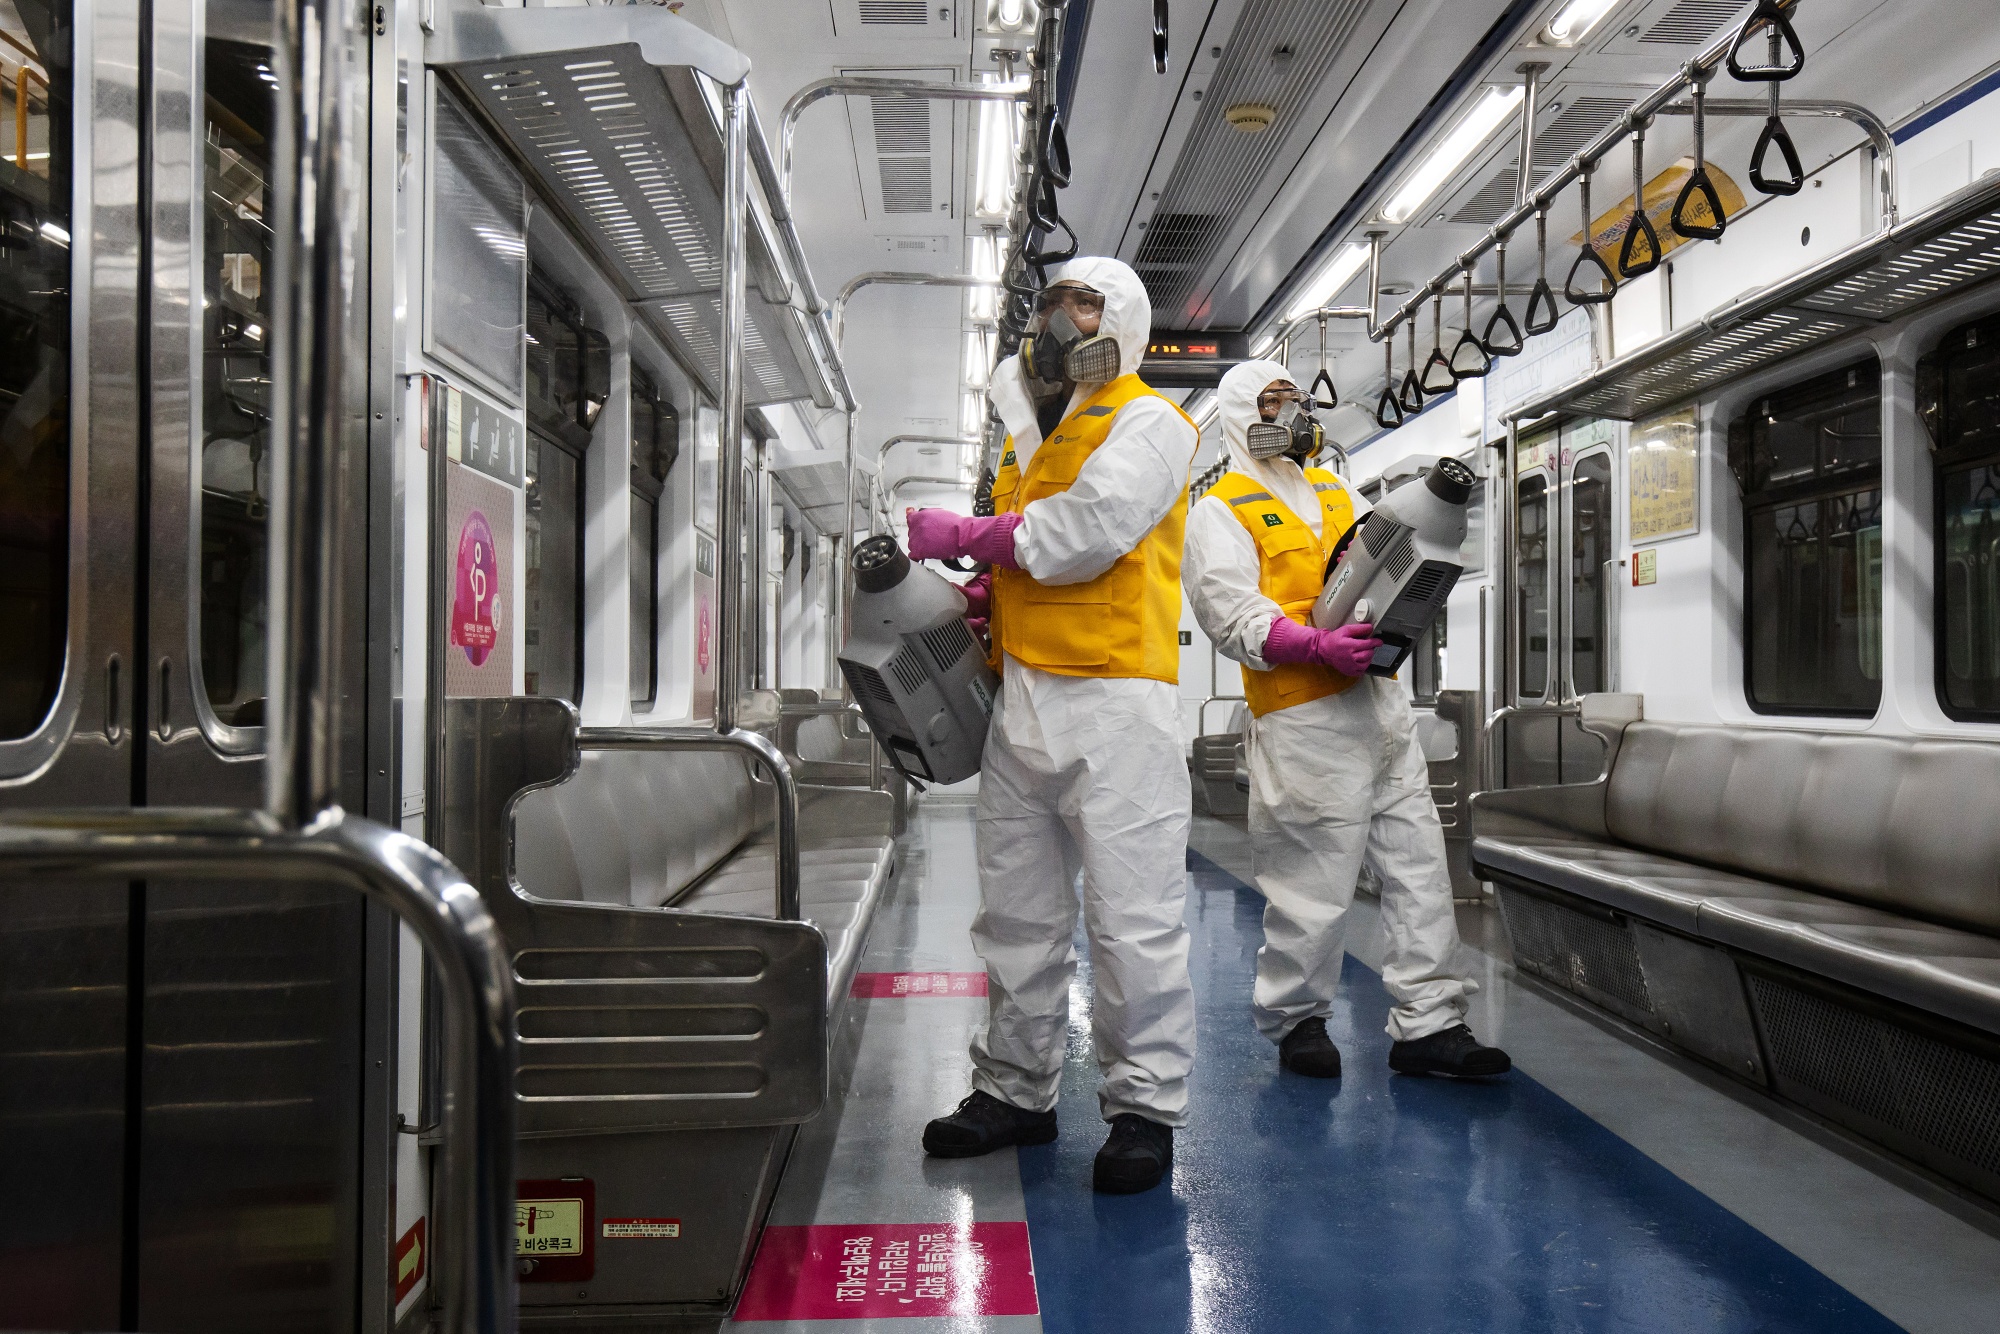 Workers wearing protective suits and masks spray disinfectant inside a Seoul Metro subway train.